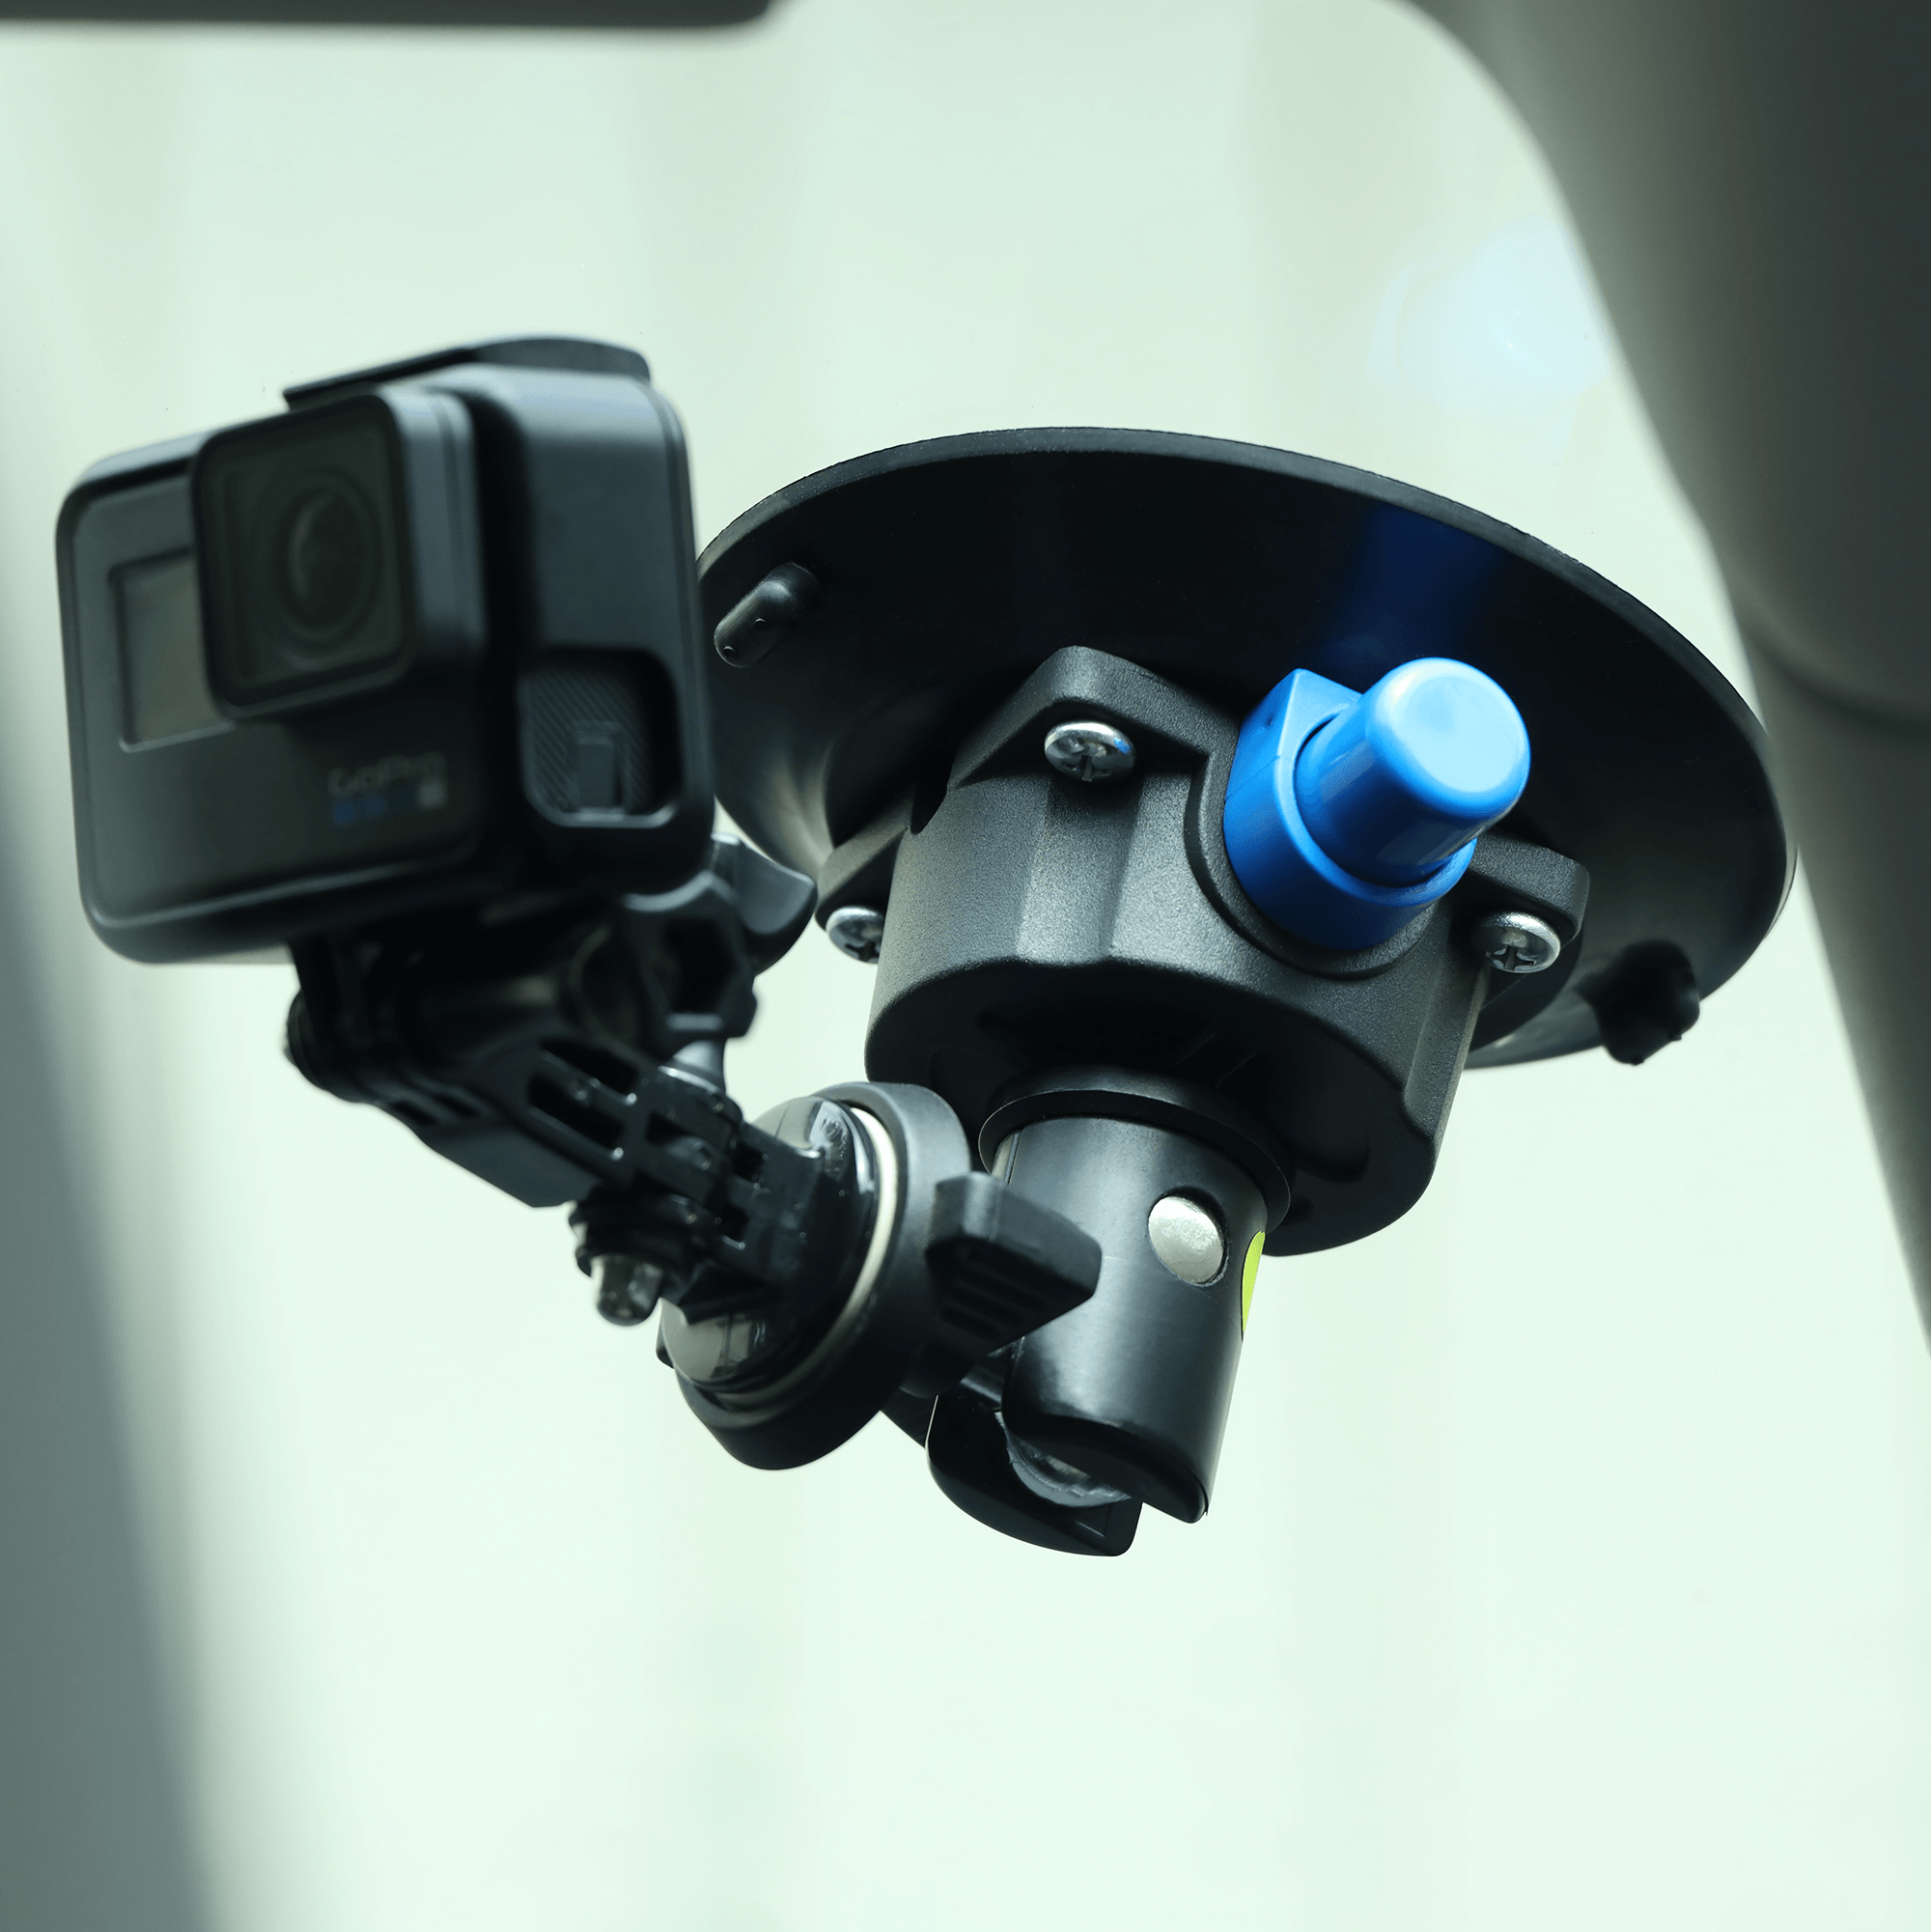  Sportway S504 Suction Cup Dash Cam Mount Holder (5th